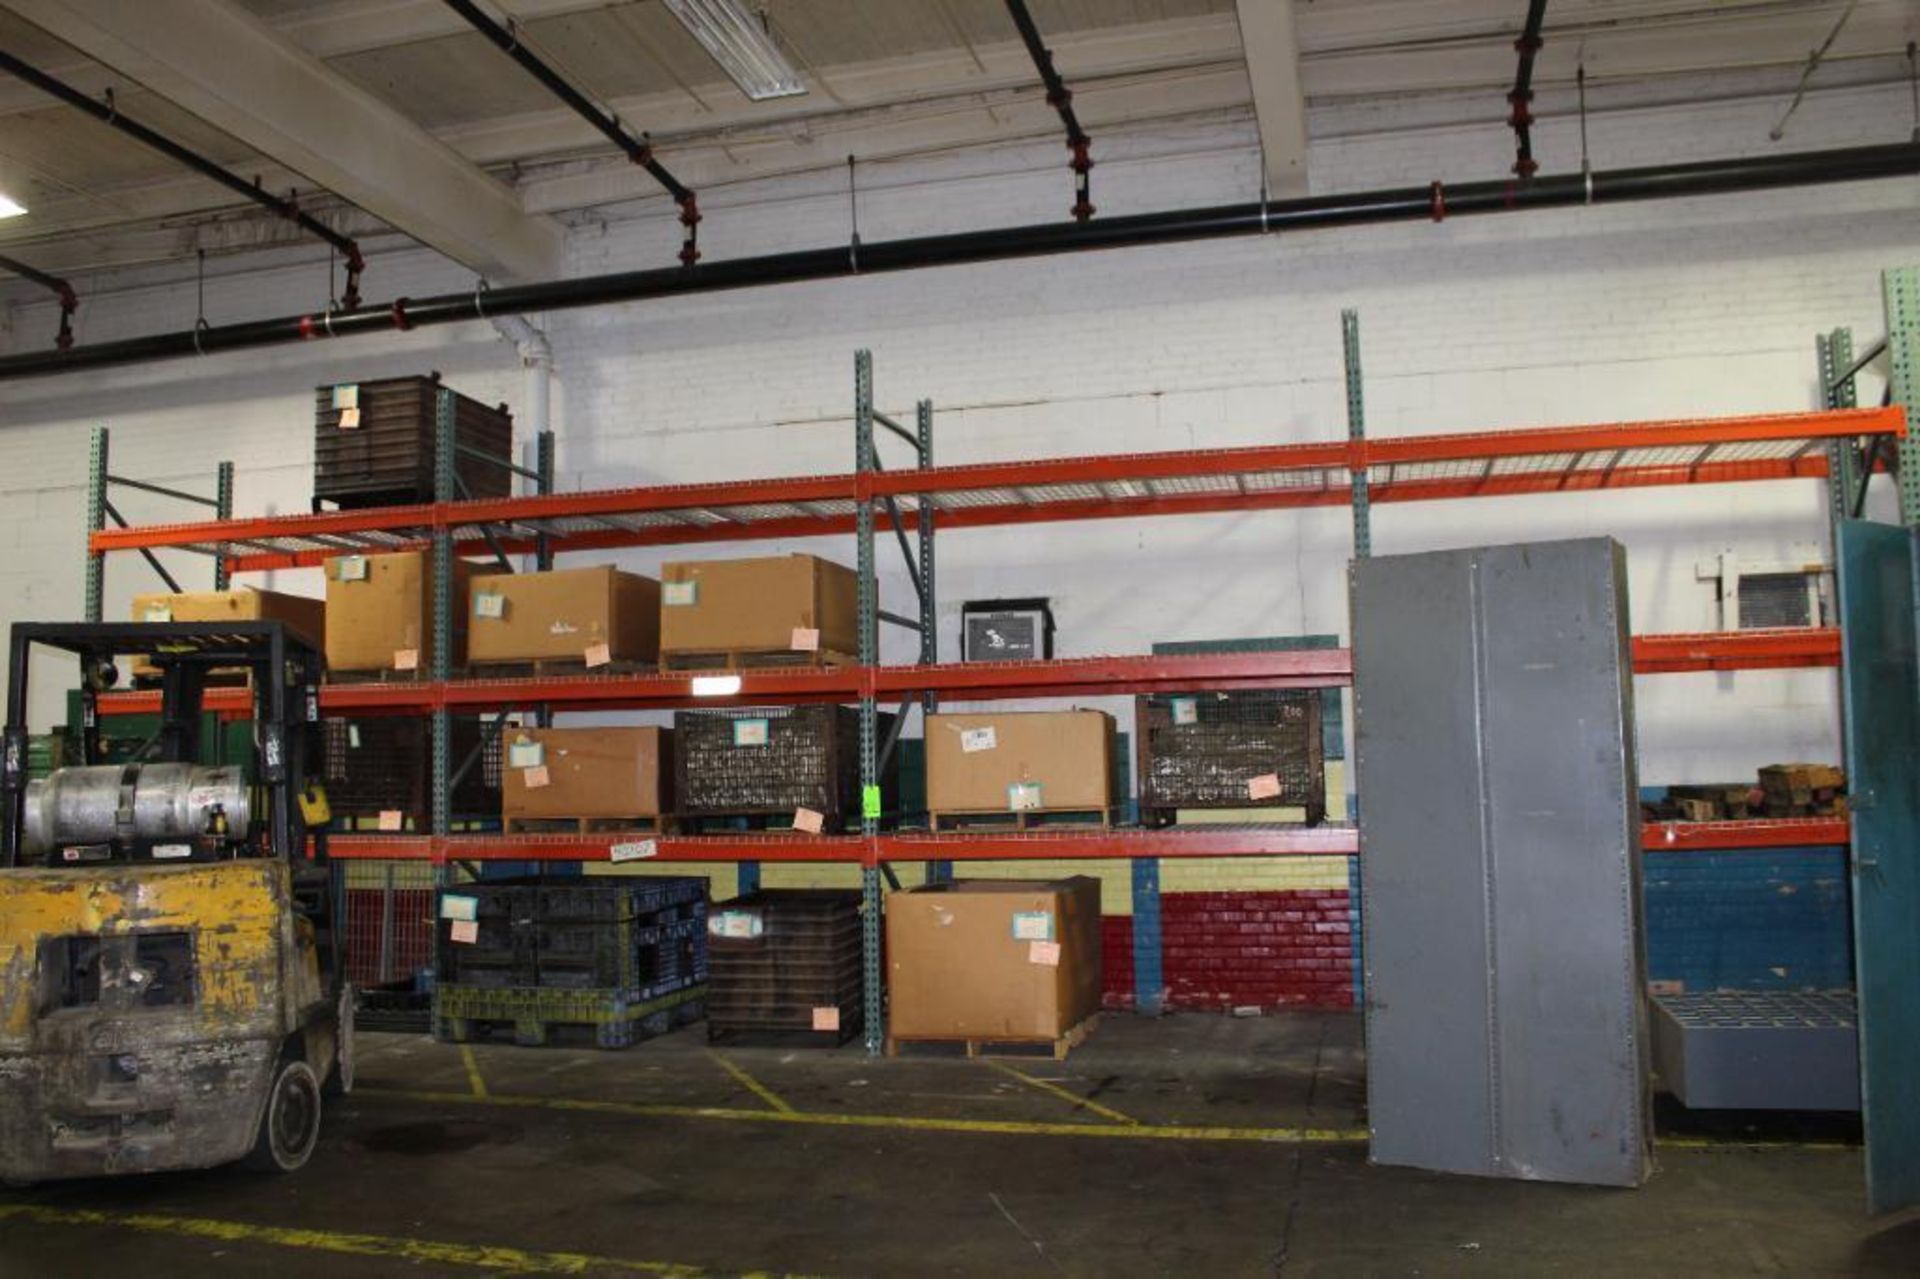 4 Sections of Pallet Racking - no contents